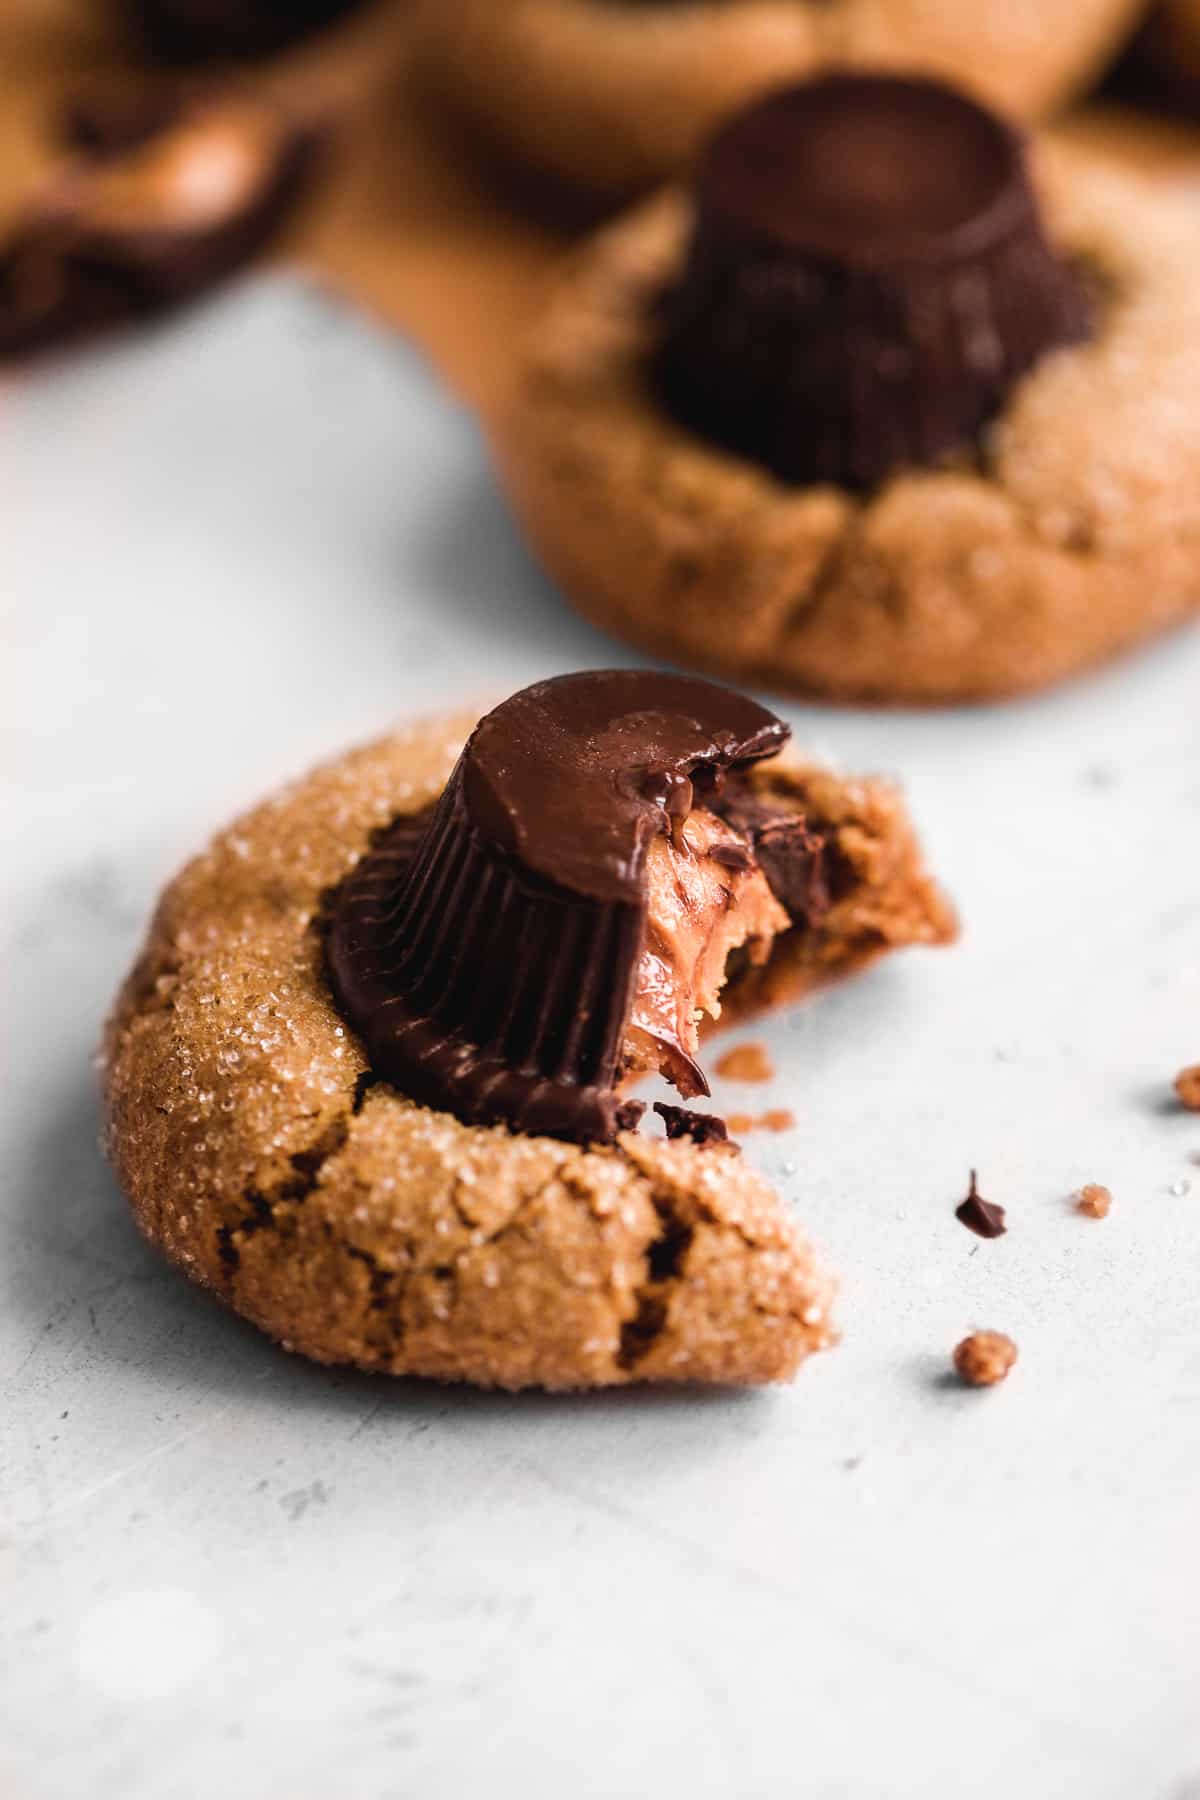 Peanut butter cookies with. peanut butter cup on top and a bite taken out of it.